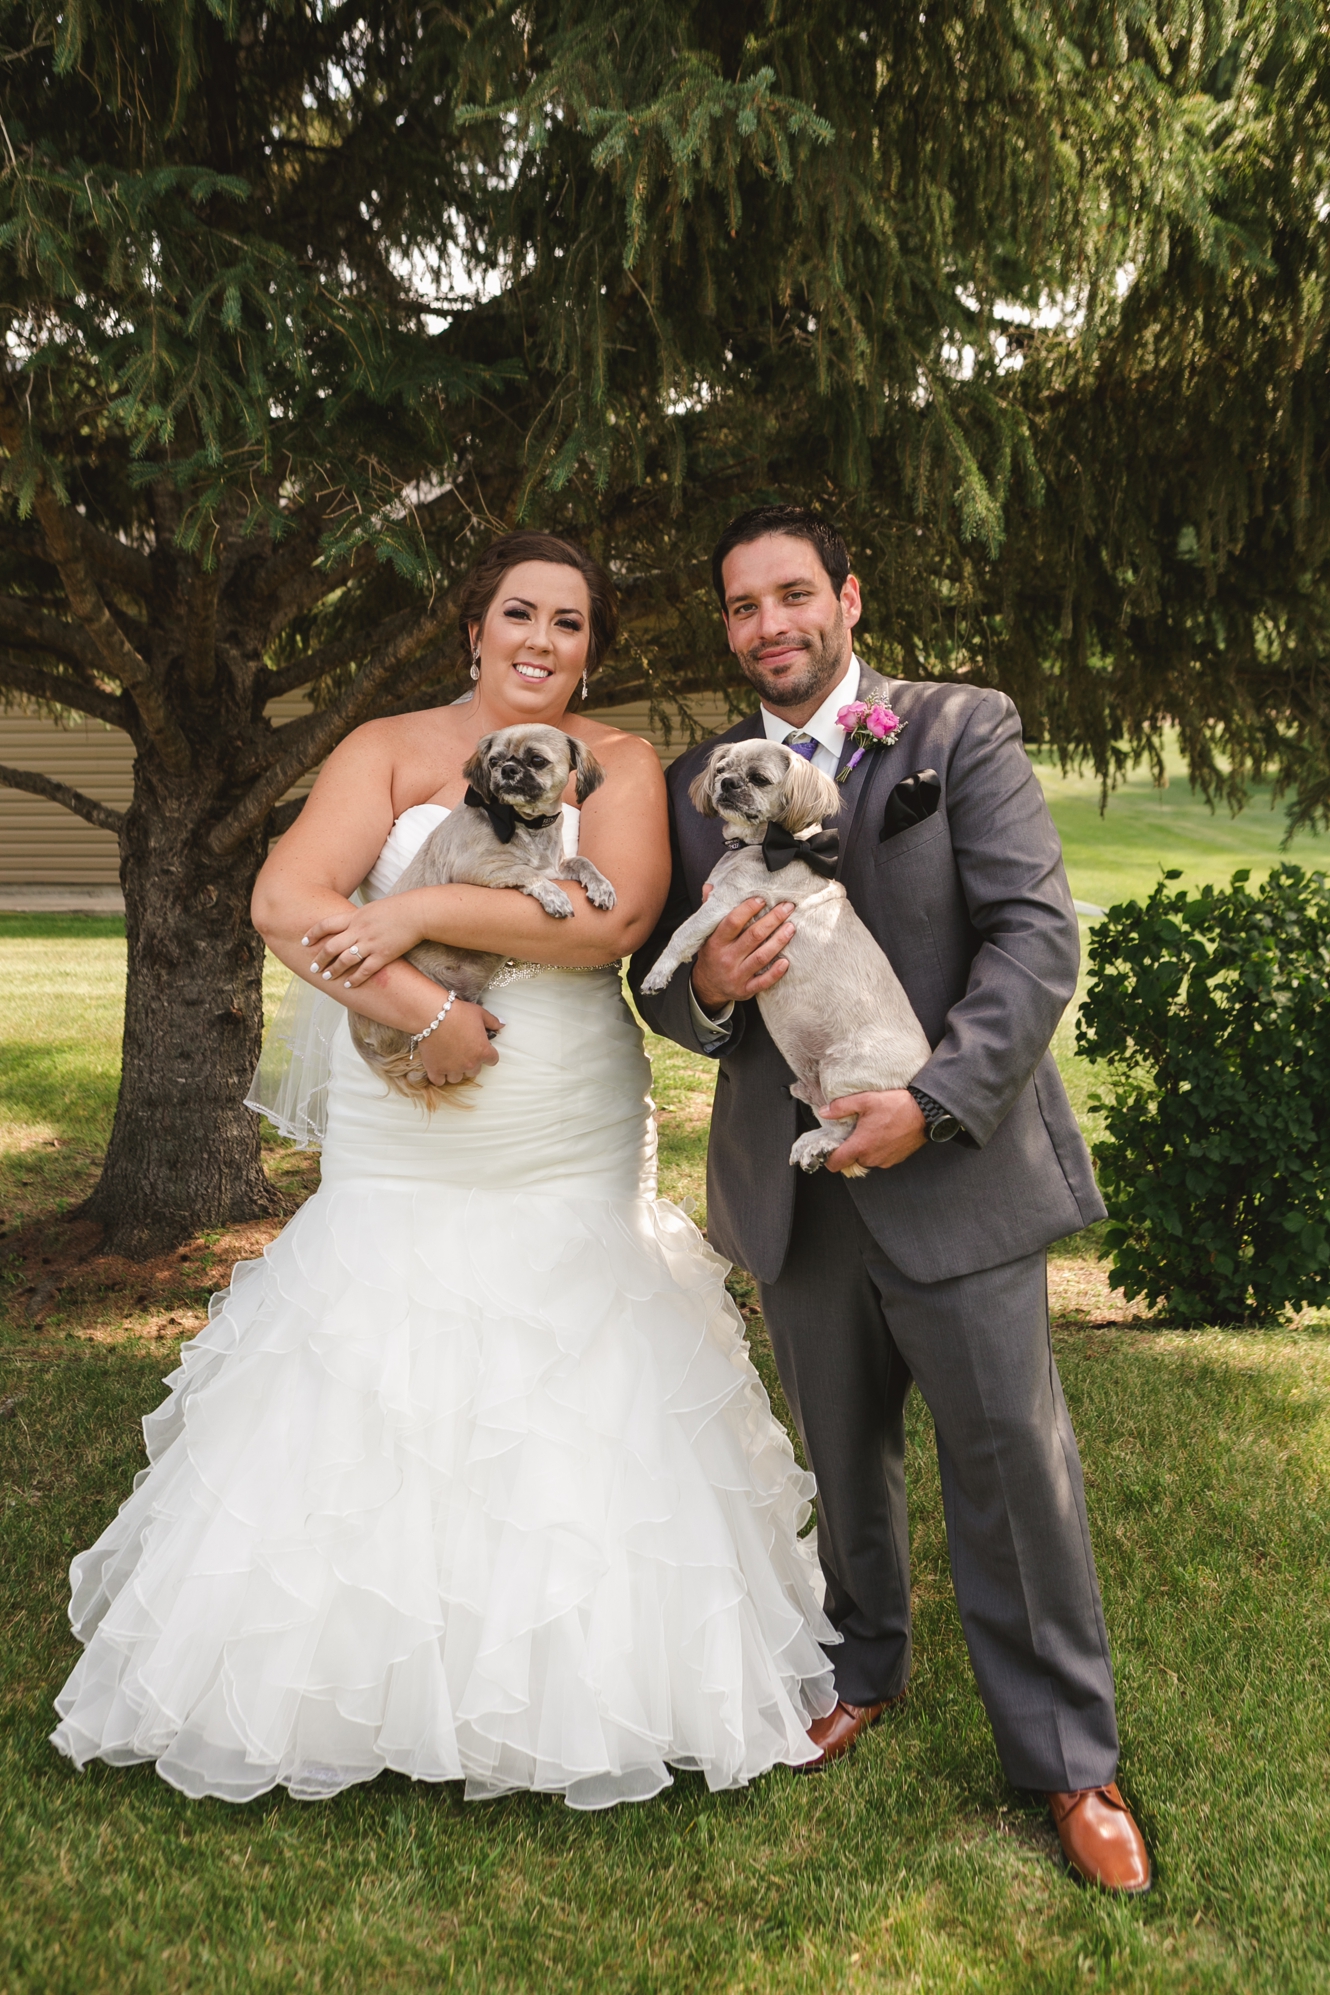 How to incorporate your pets into your wedding photo